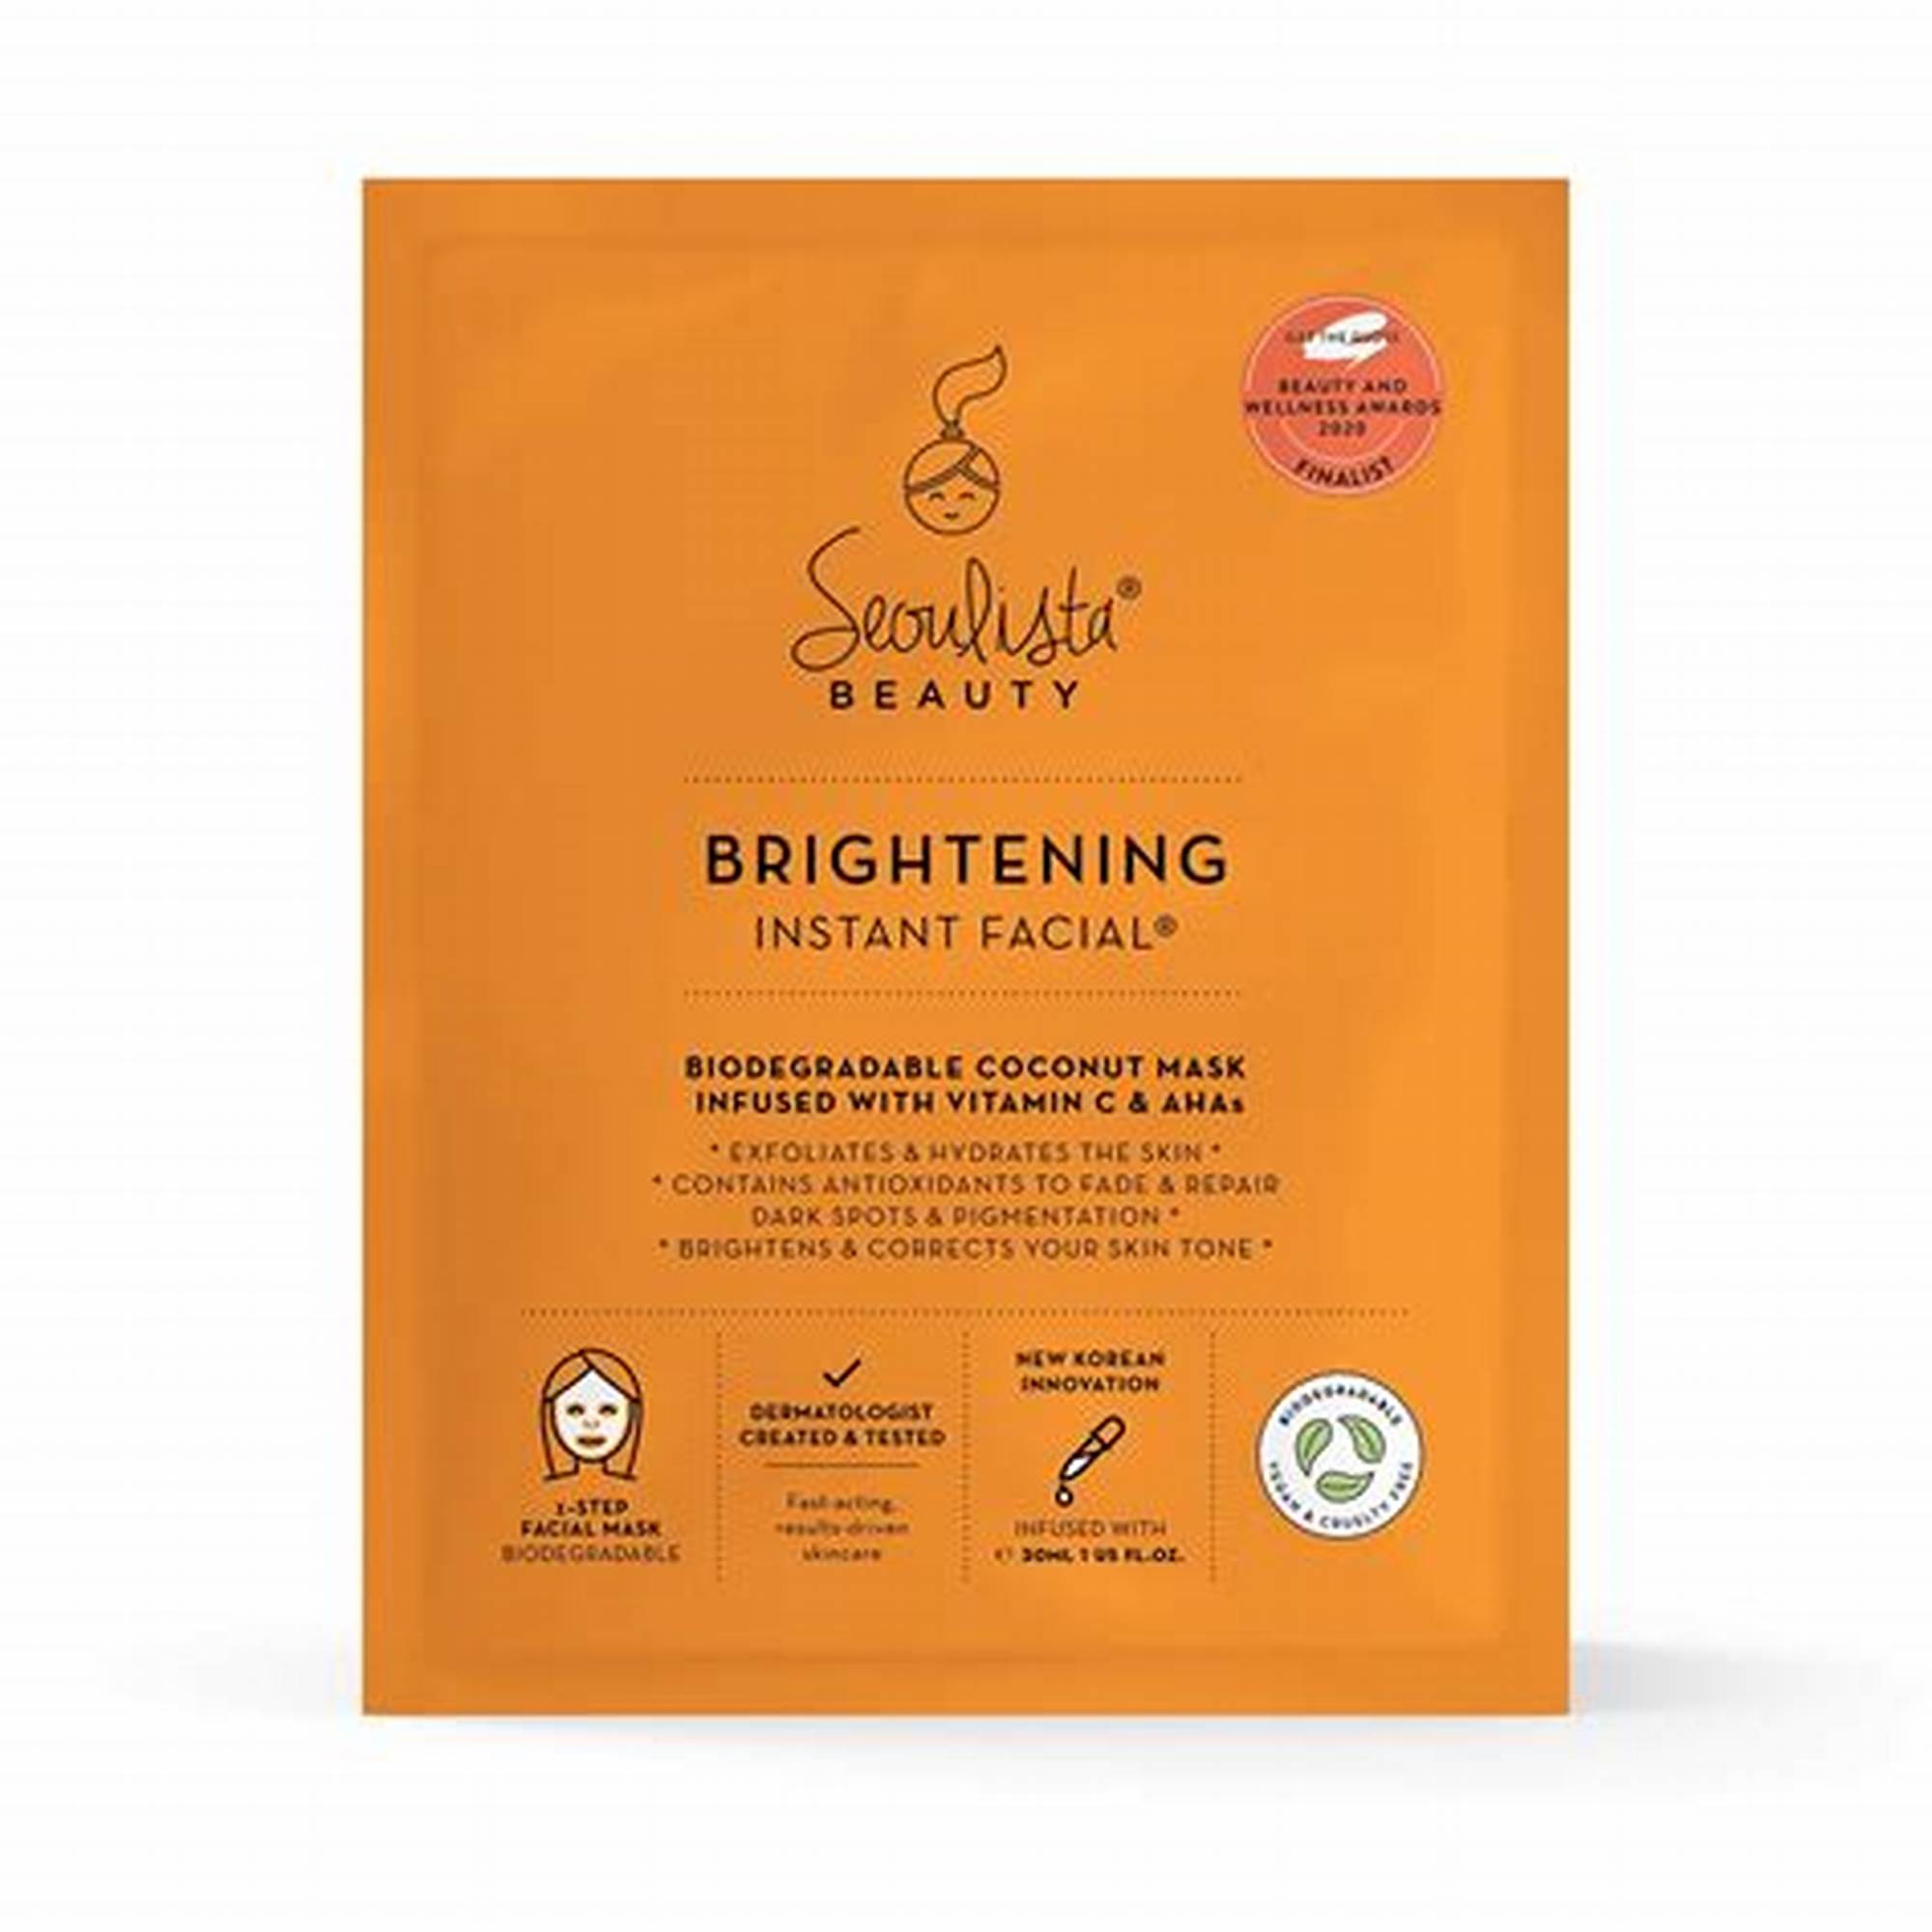 Seoulista Beauty® Brightening Instant Facial Multi Pack